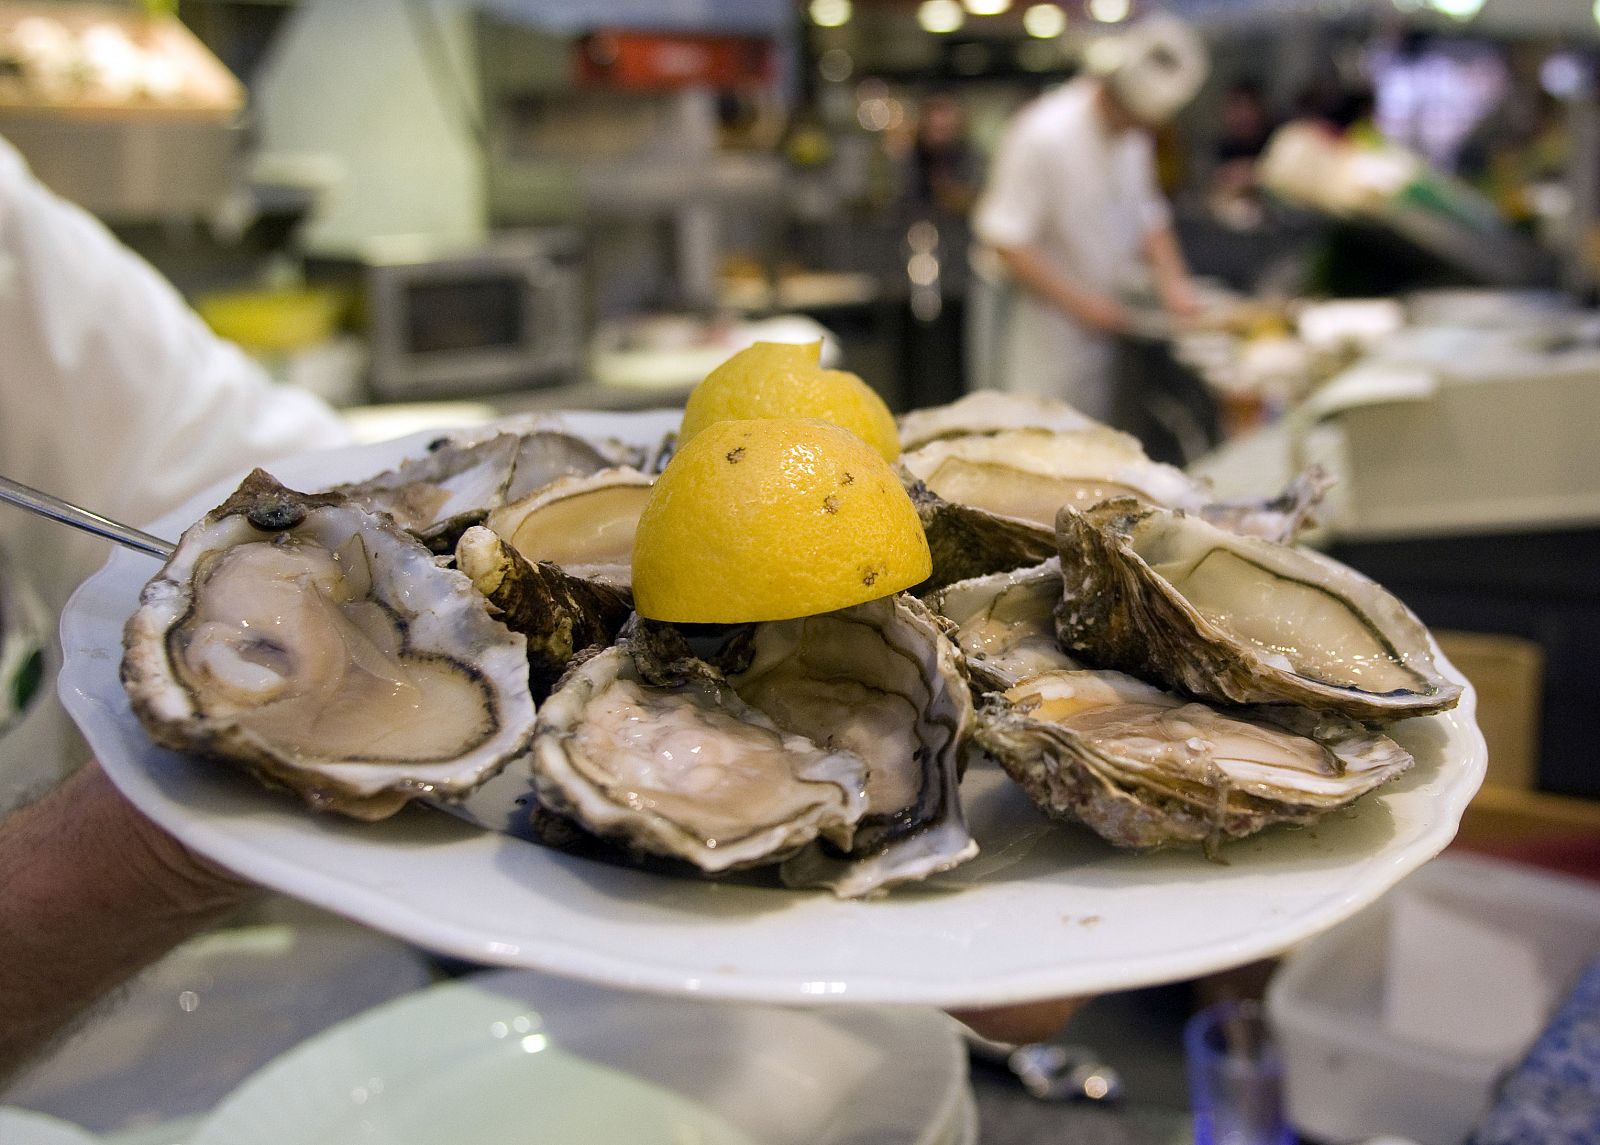 A plate of oysters is seen in the food hall at the KaDeWe department store in Berlin